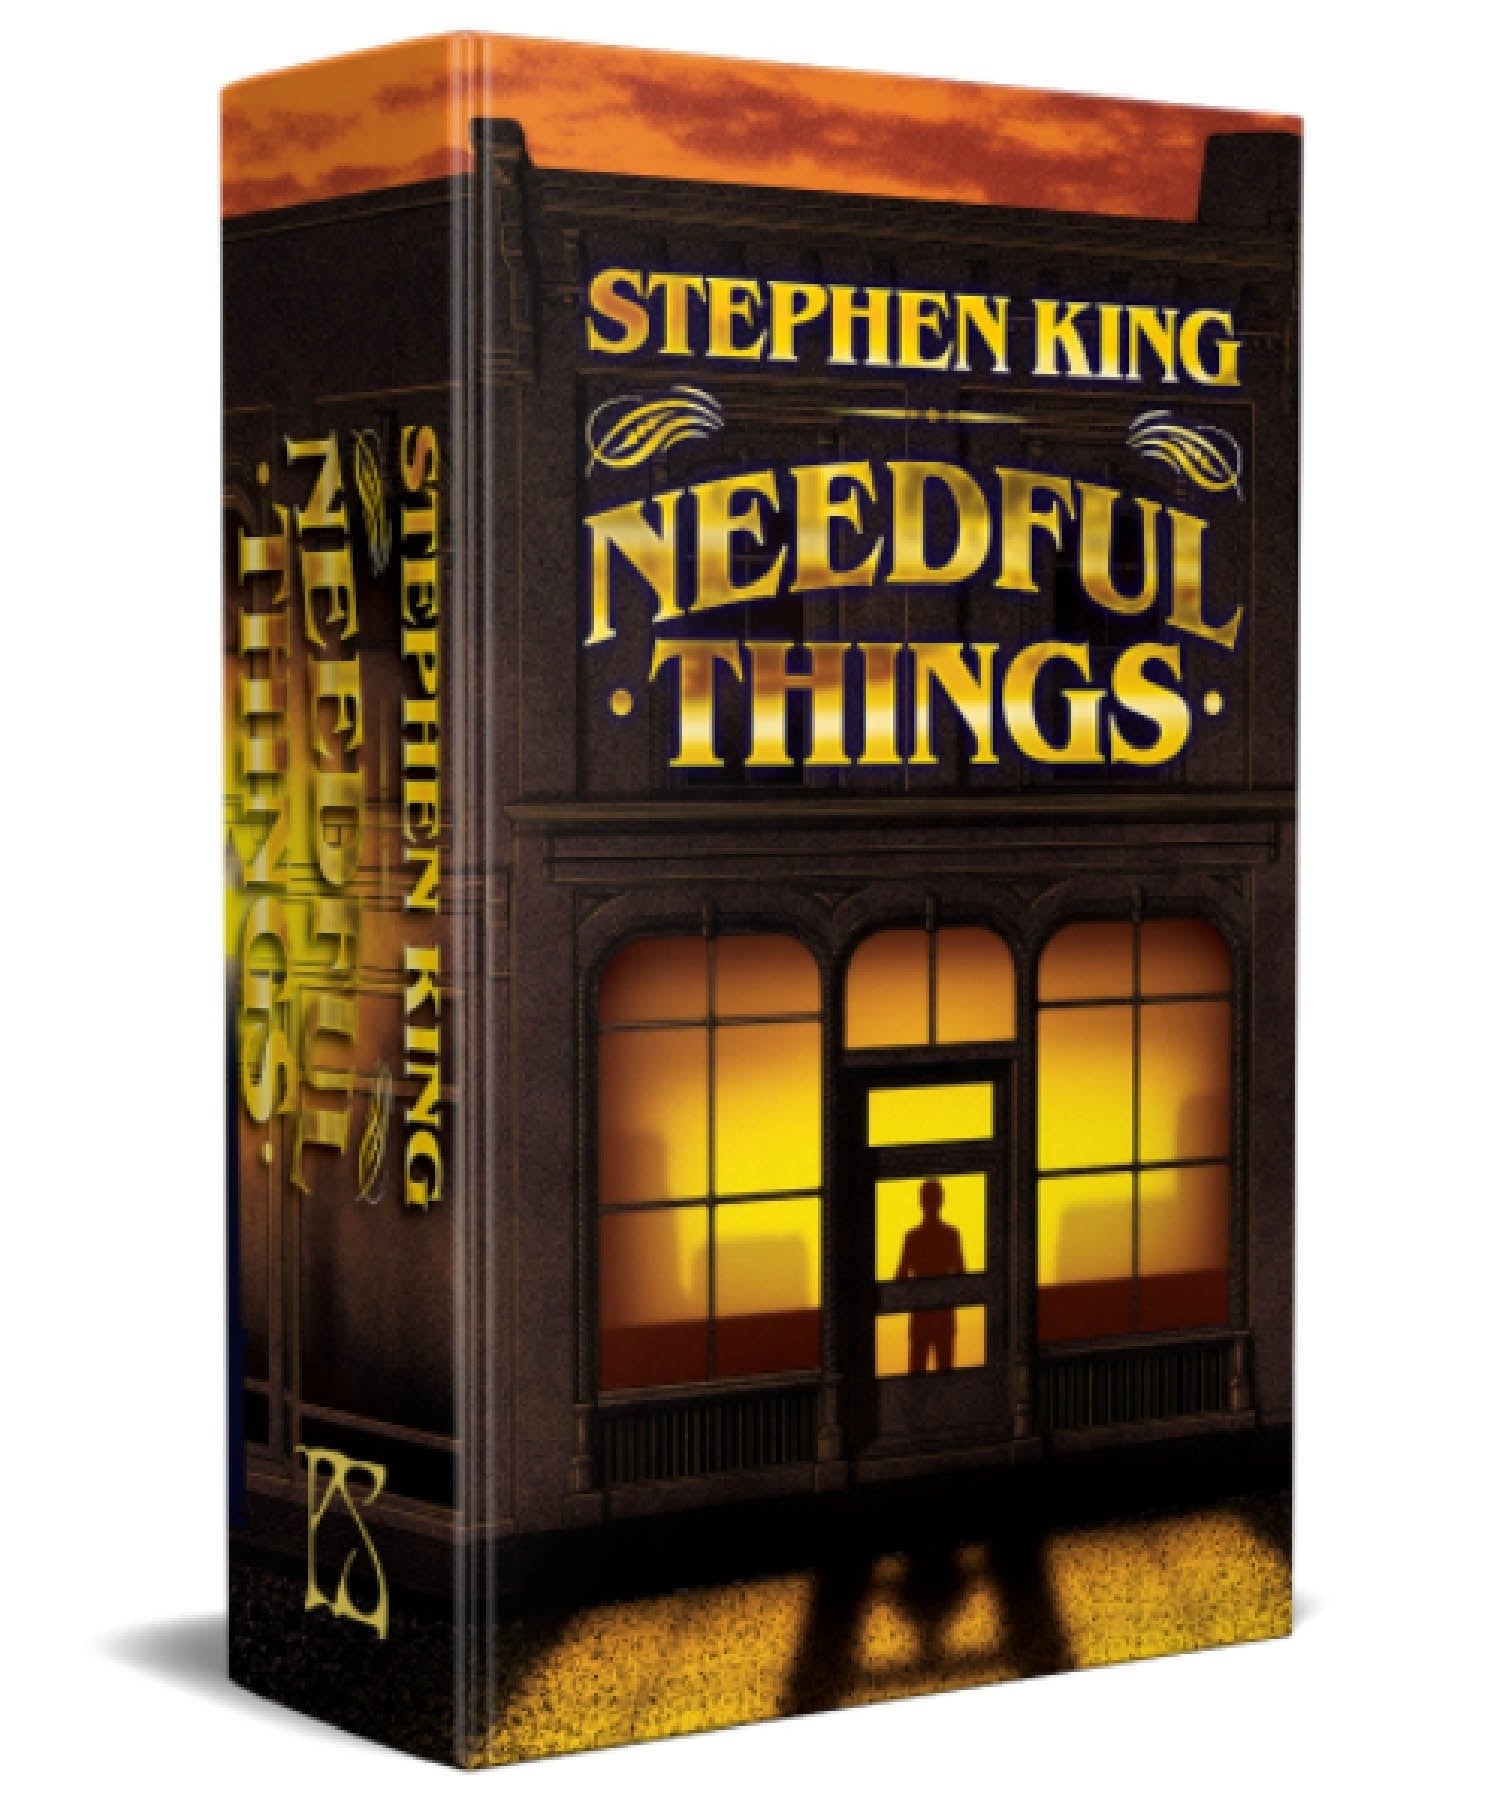 Needful Things by Stephen King Limited Edition Slipcased Hardcover - Slight Damage